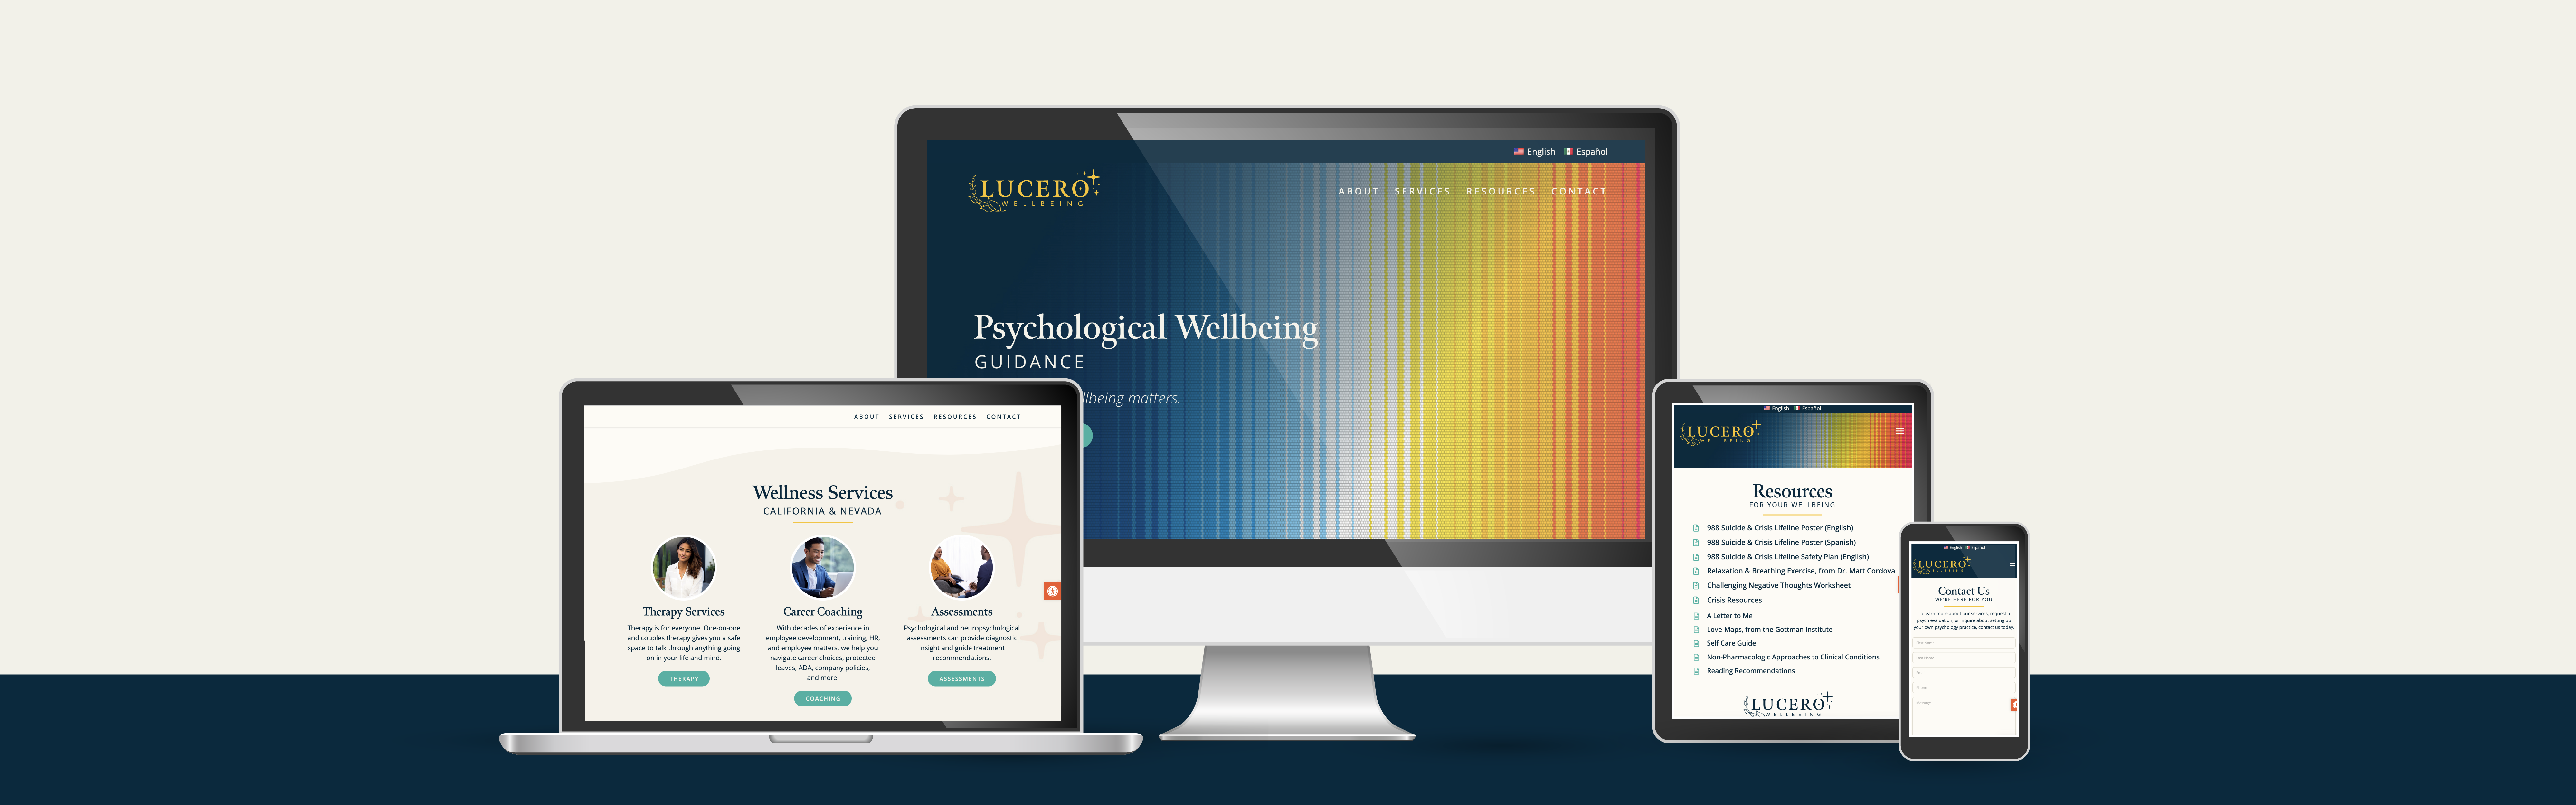 A digital device mockup displaying the Lucero Wellbeing guidance website on a desktop computer, tablet, and smartphone.